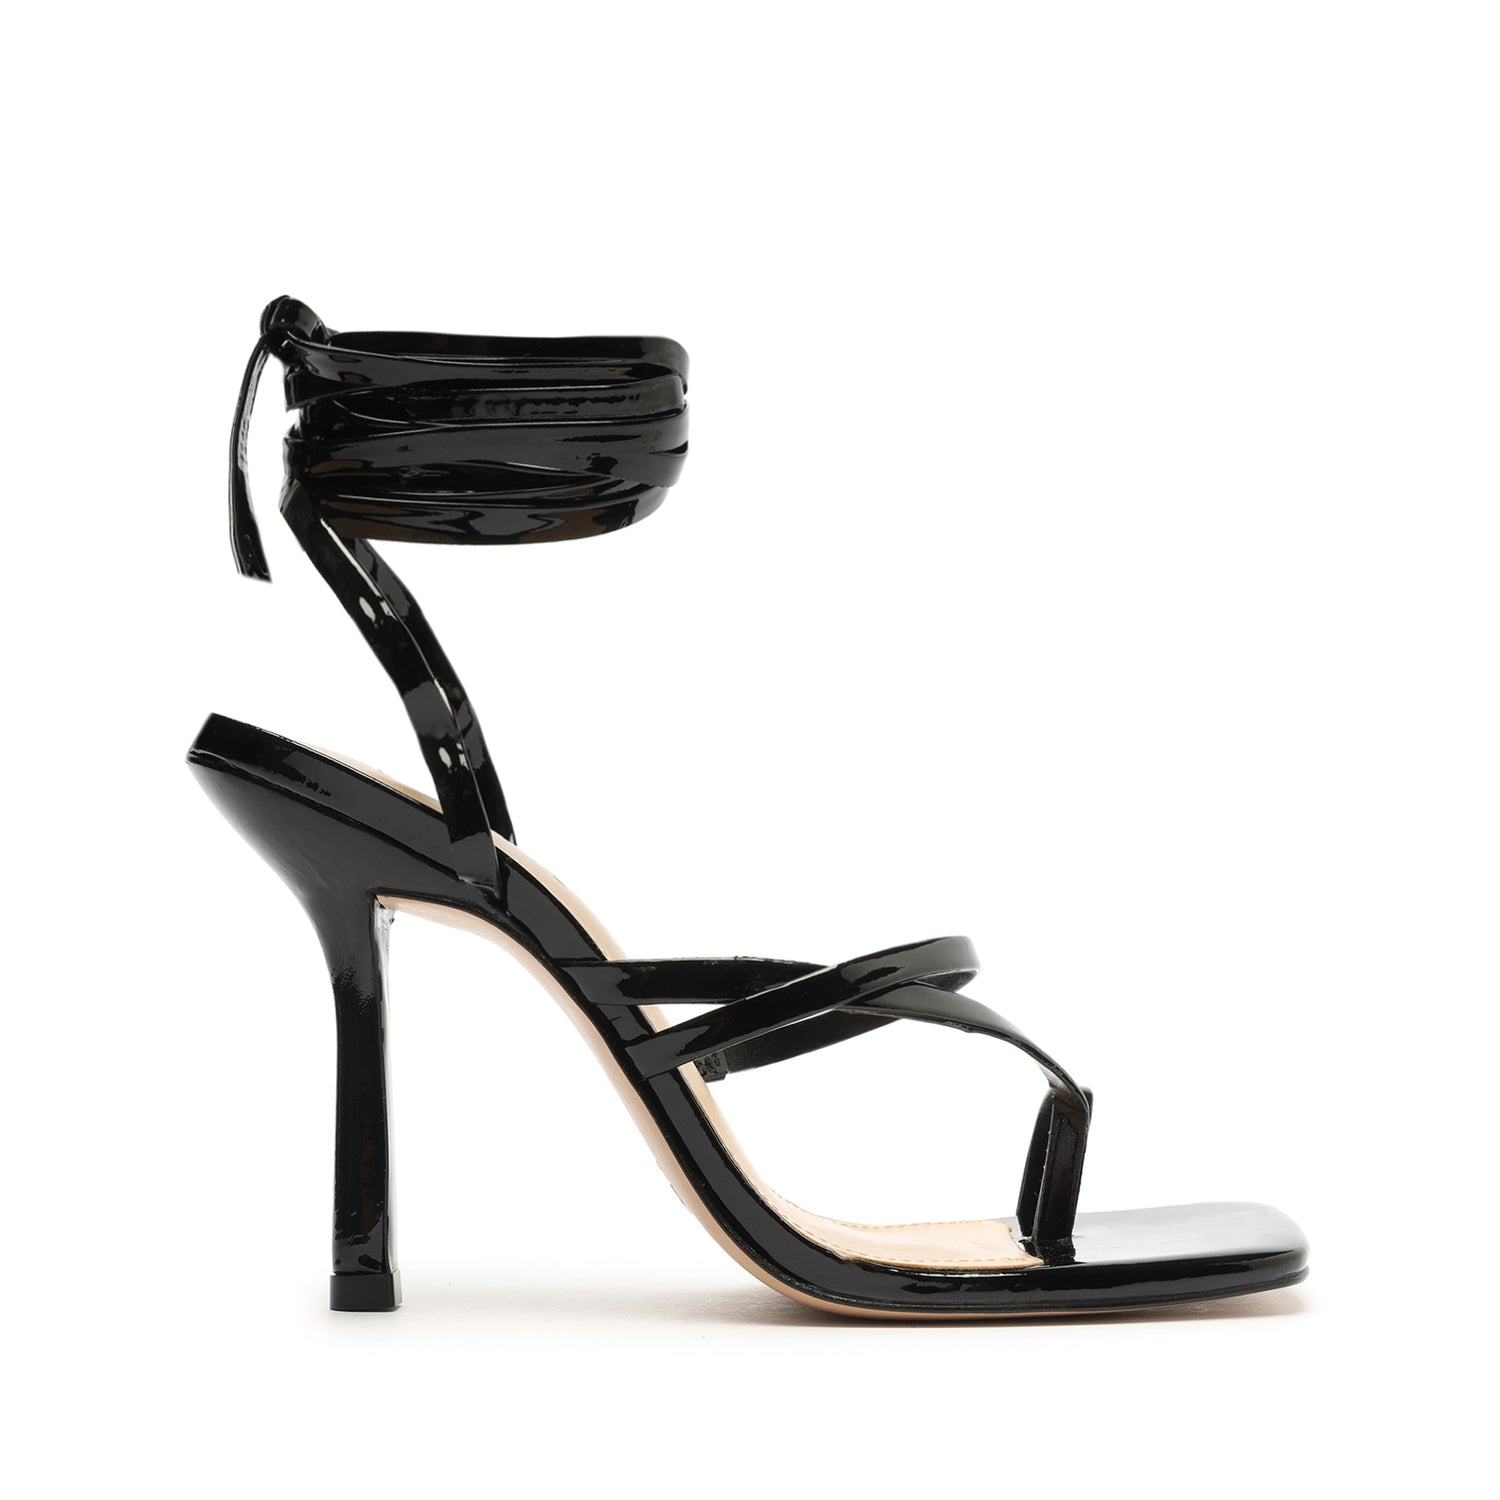 FAUX PATENT LEATHER HIGH HEEL SANDALS - Black